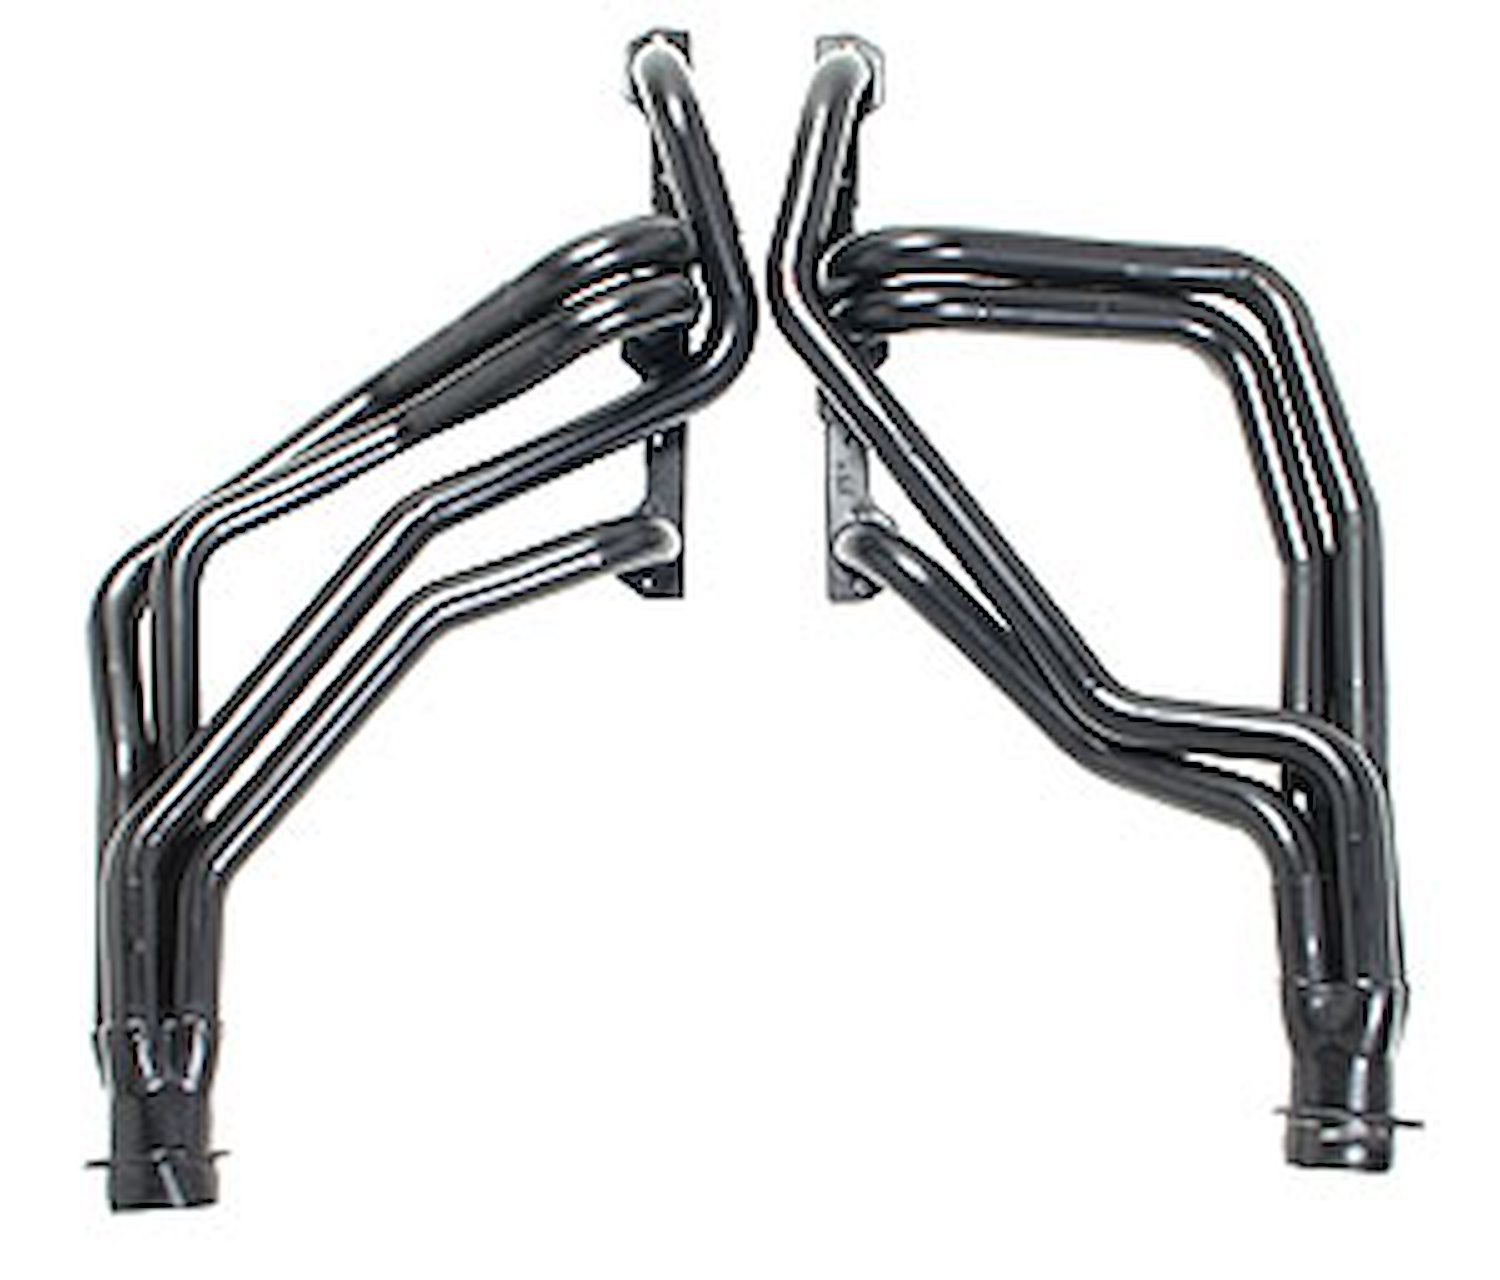 S10 Engine Swap Headers 1982-1993 Chevy S10 with